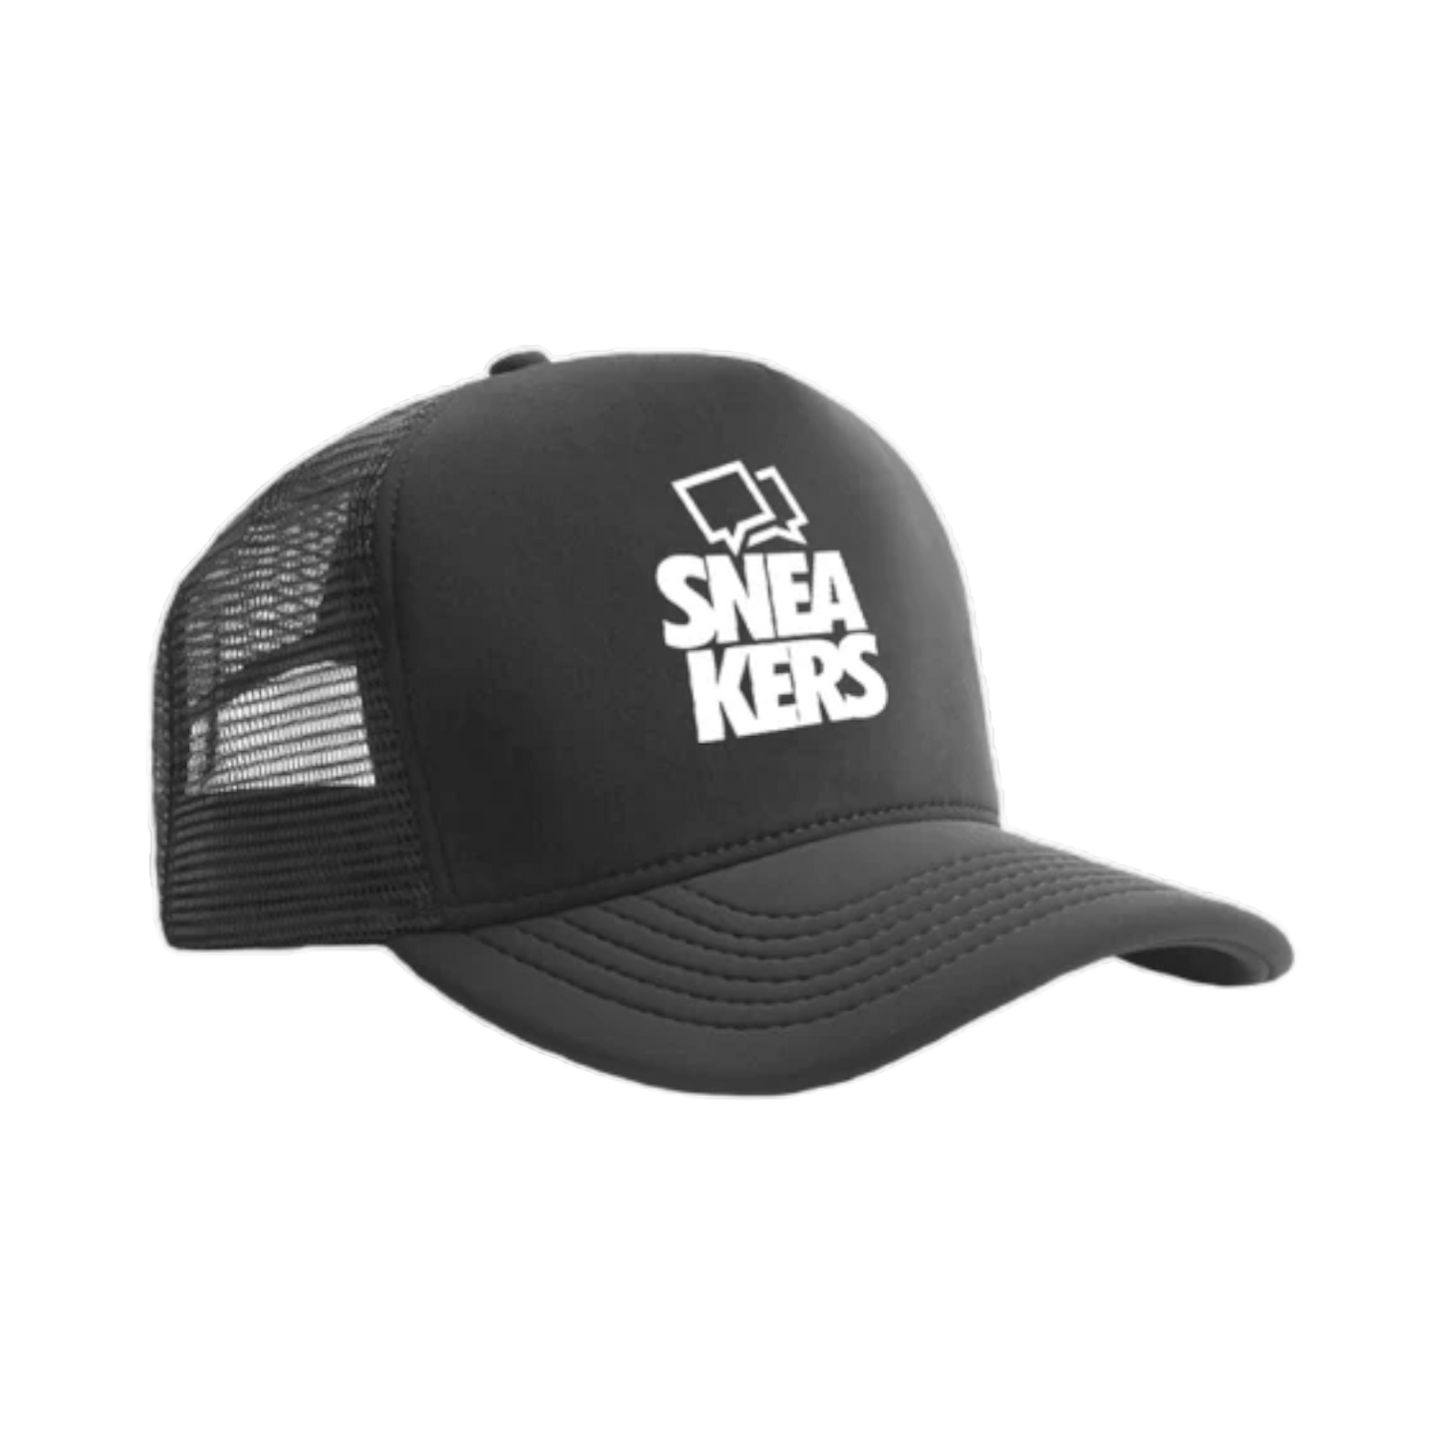 Limited Edition "Sneakers" Cap - Trucker style